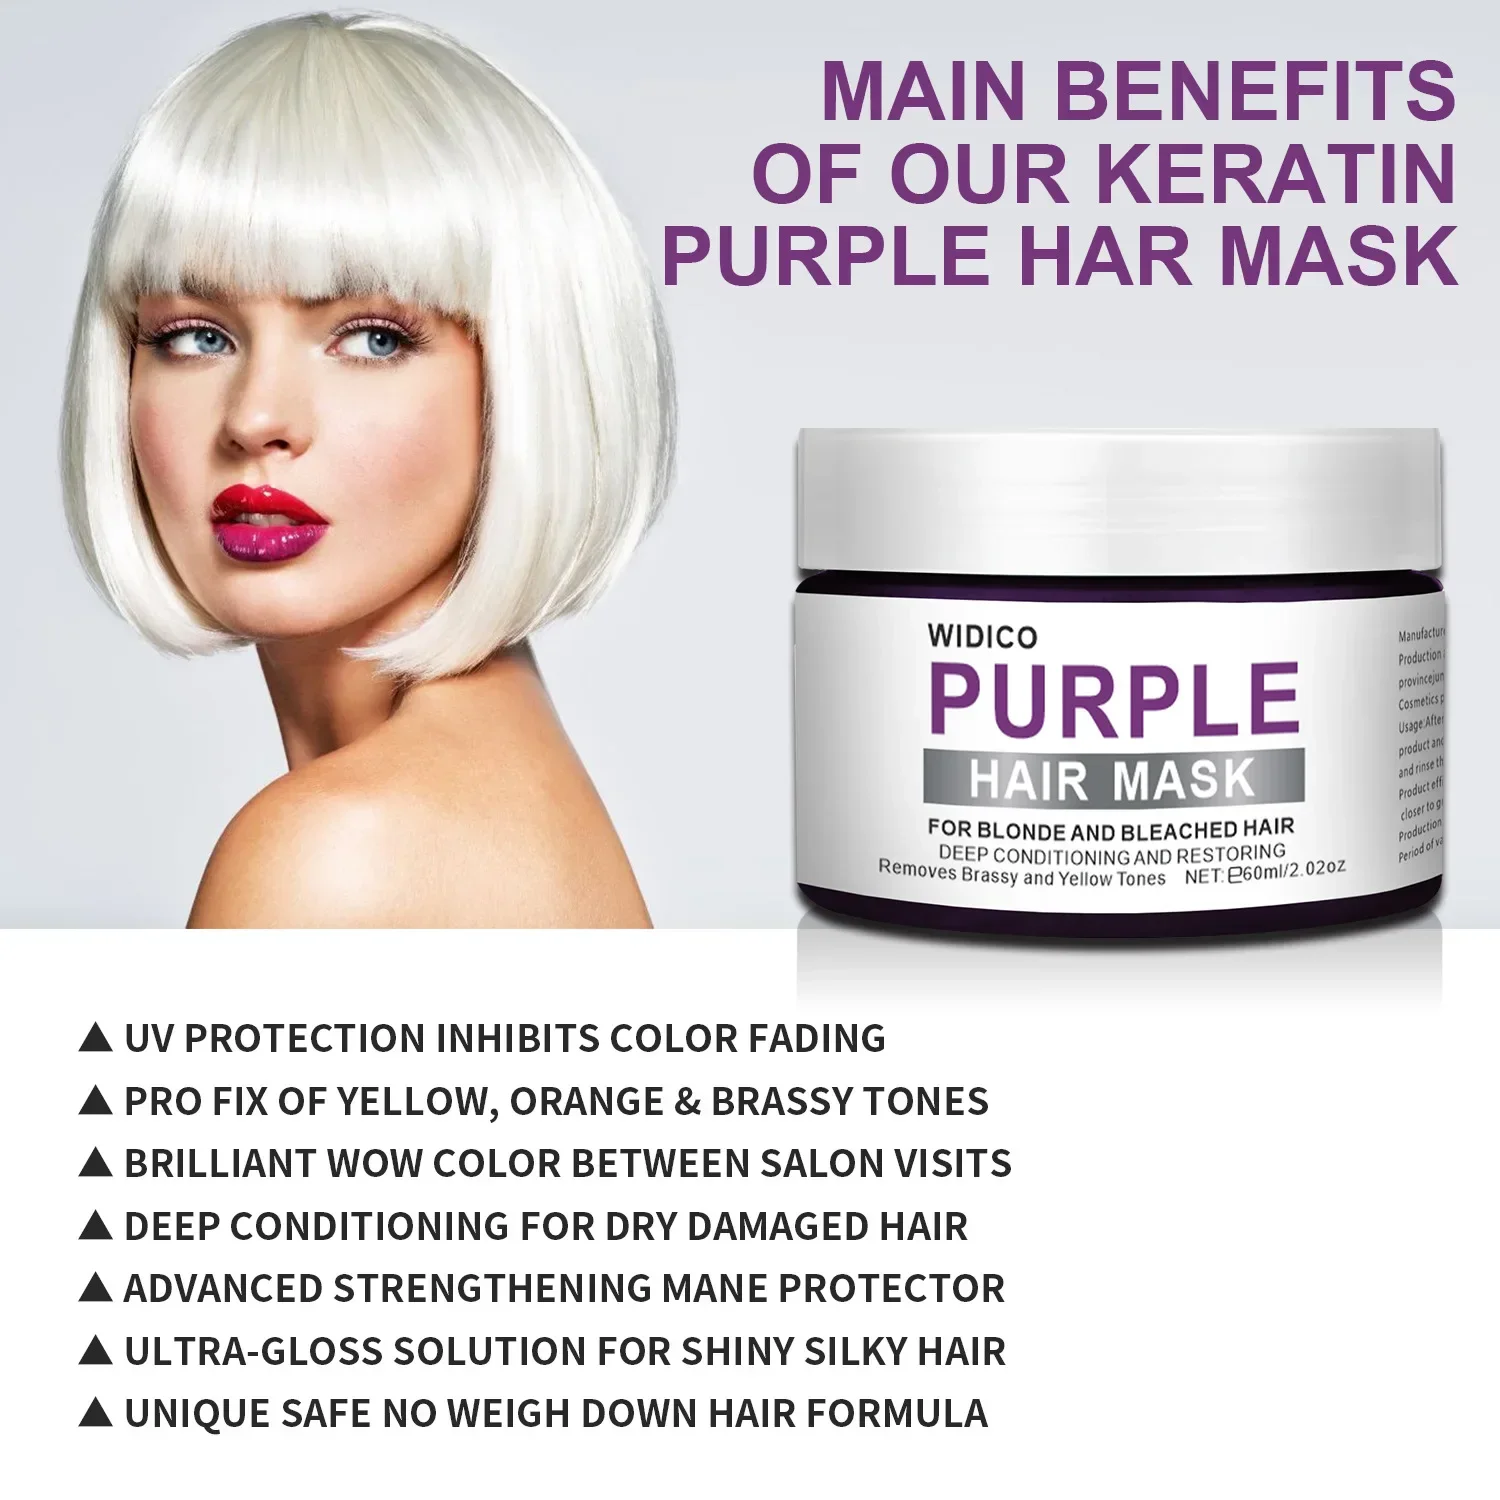 60g Blonde Purple Hair Shampoo Removes Yellow And Brassy Tones Silver Ash Look Purple Hair Shampoo Professional Hair Care purple hair mask for blonde hair removes brassy yellow tones lightens blonde ash silver grays hair care treatment sulfate free